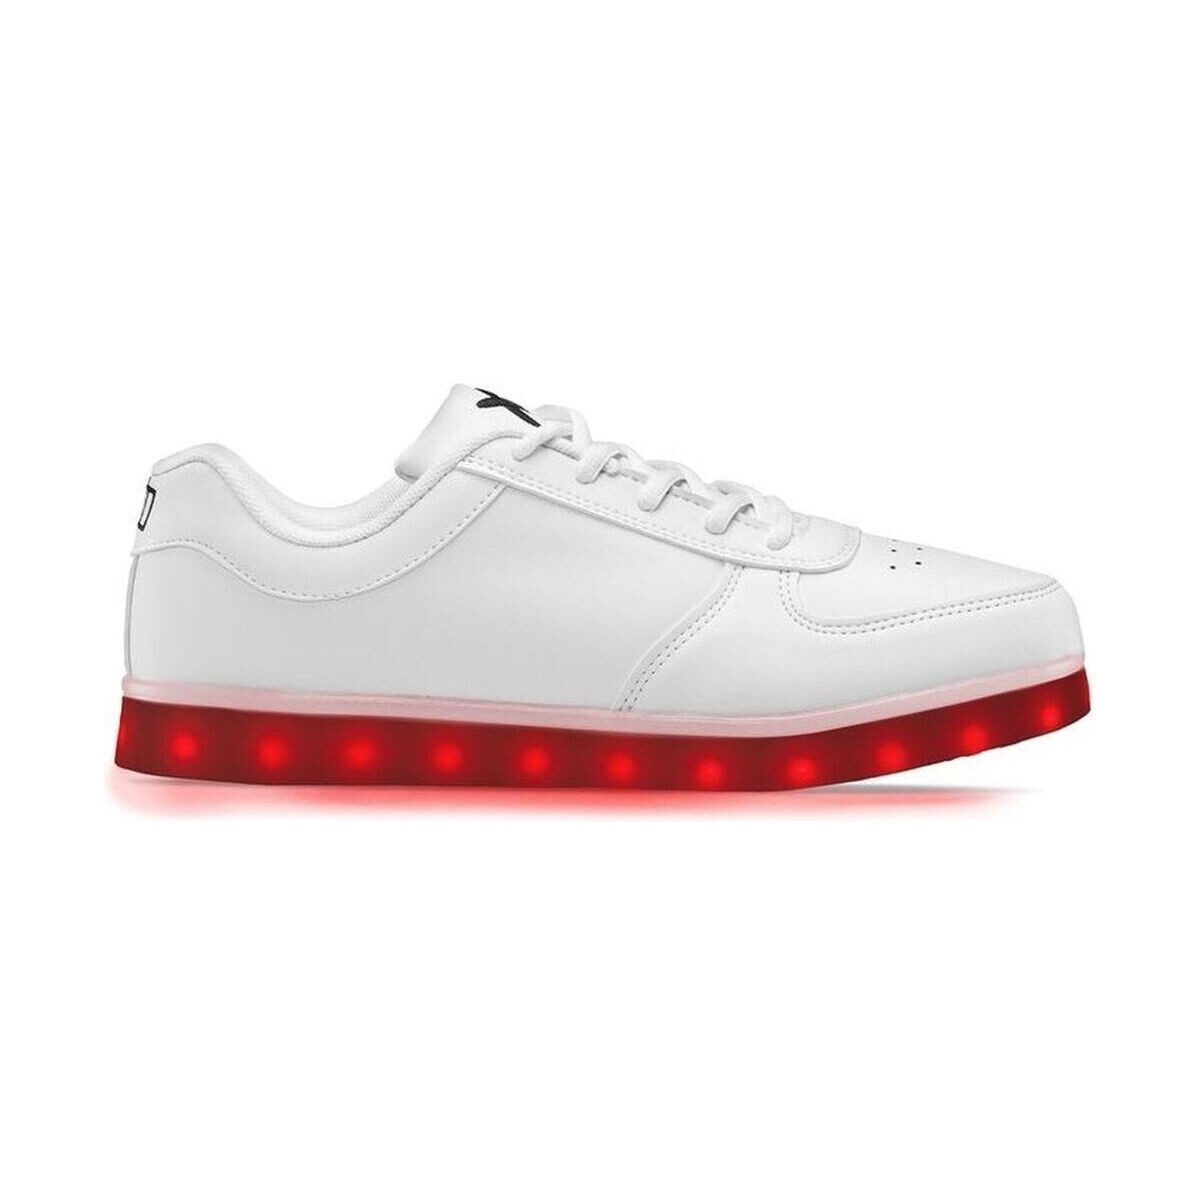 Chaussures Femme Baskets mode Wize & Ope LED 01 Blanc